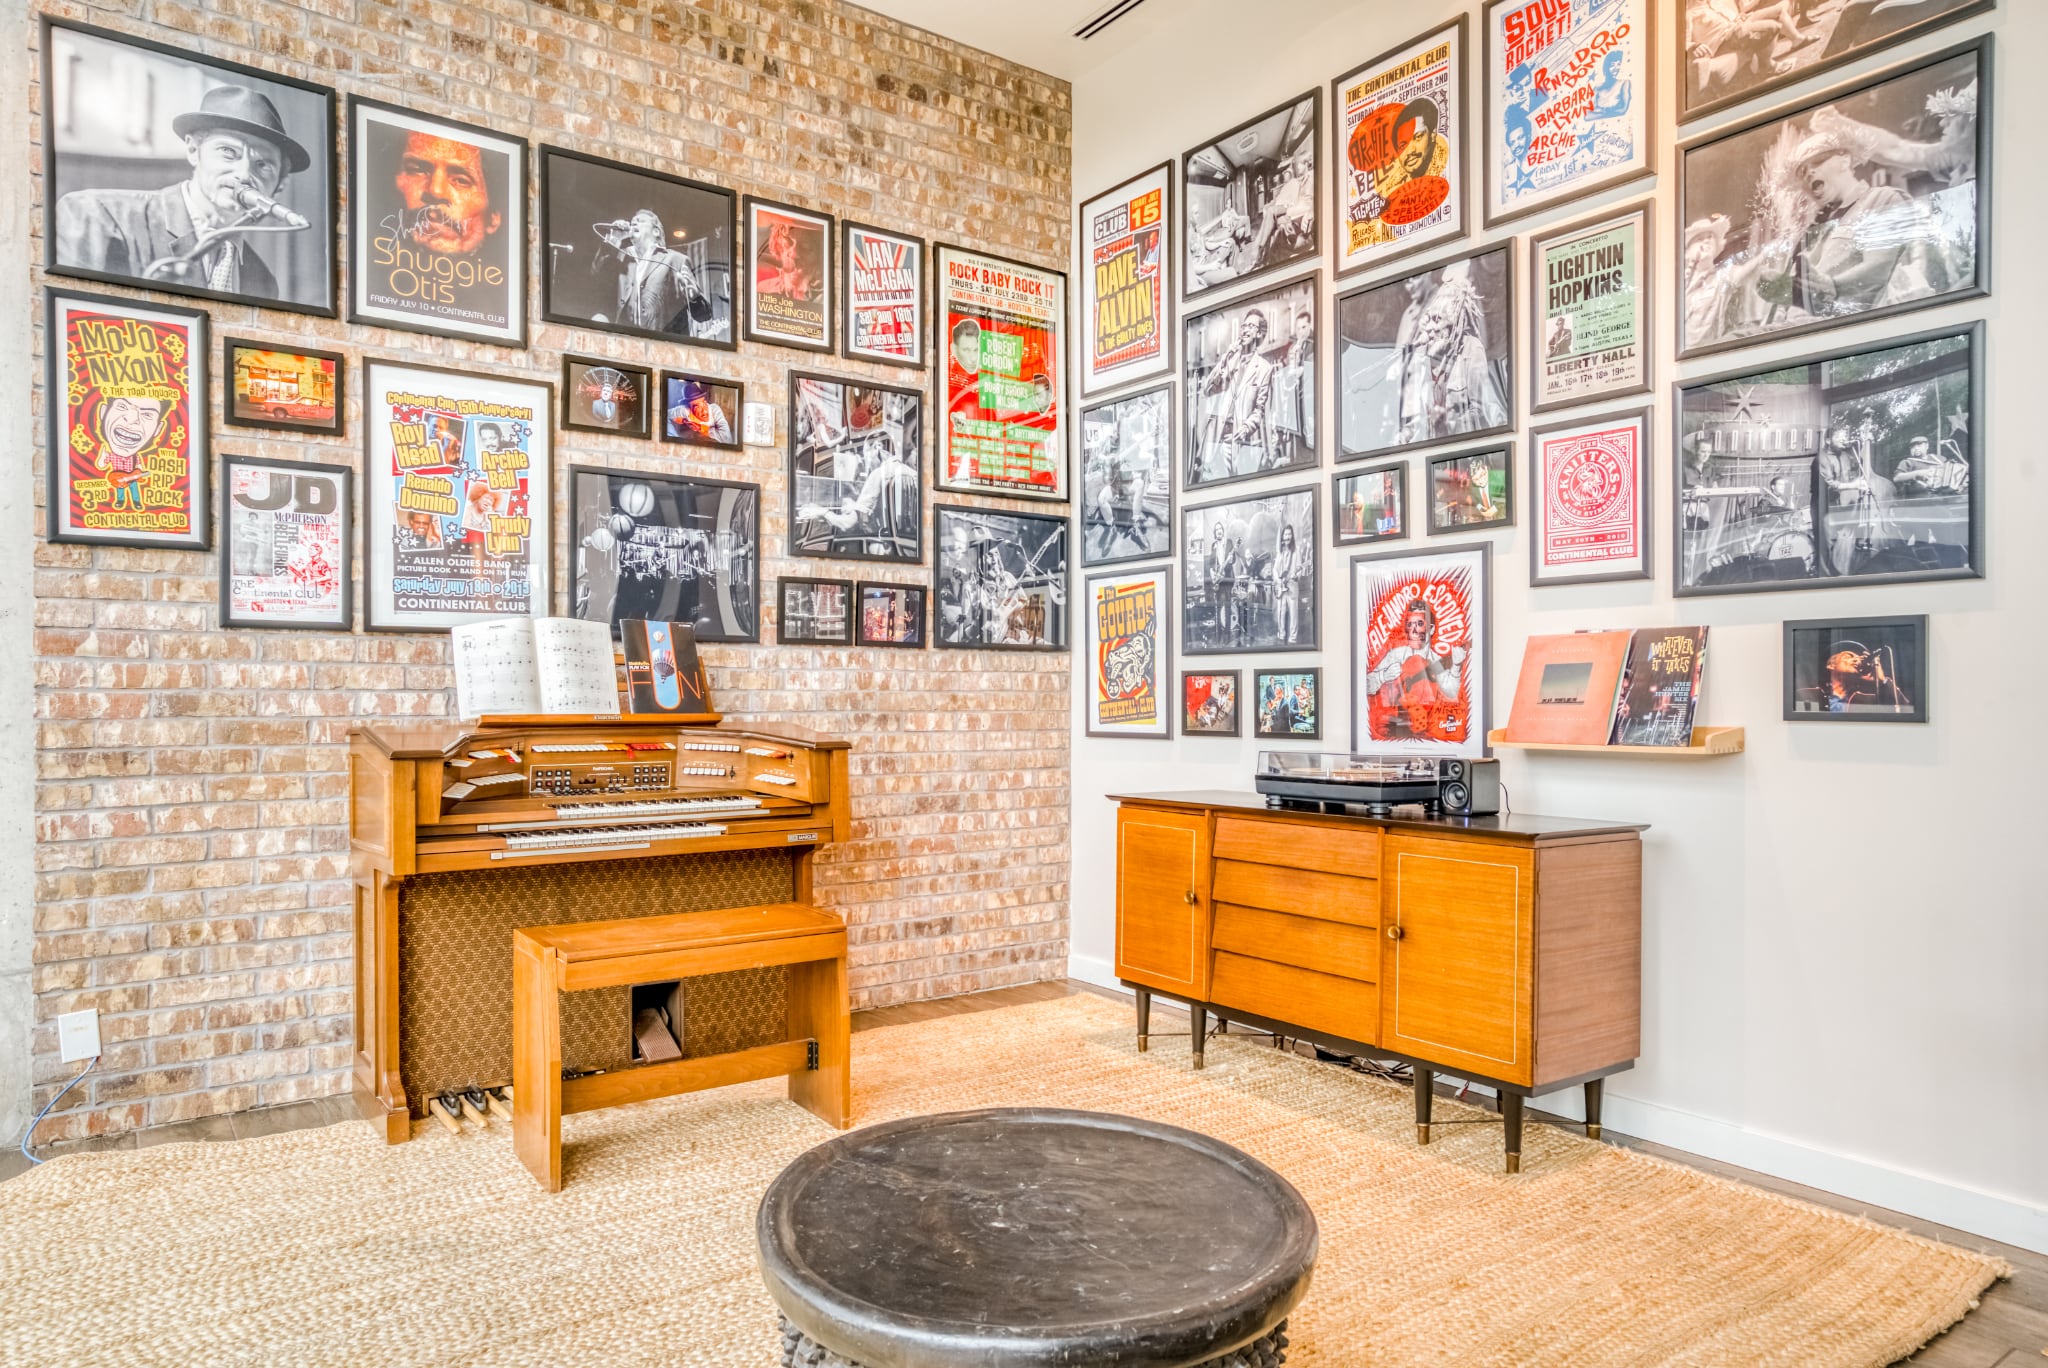 The ground floor residents' lounge at Mid Main Lofts featuring art, photos, and posters from the neighboring Continental Club, and an organ